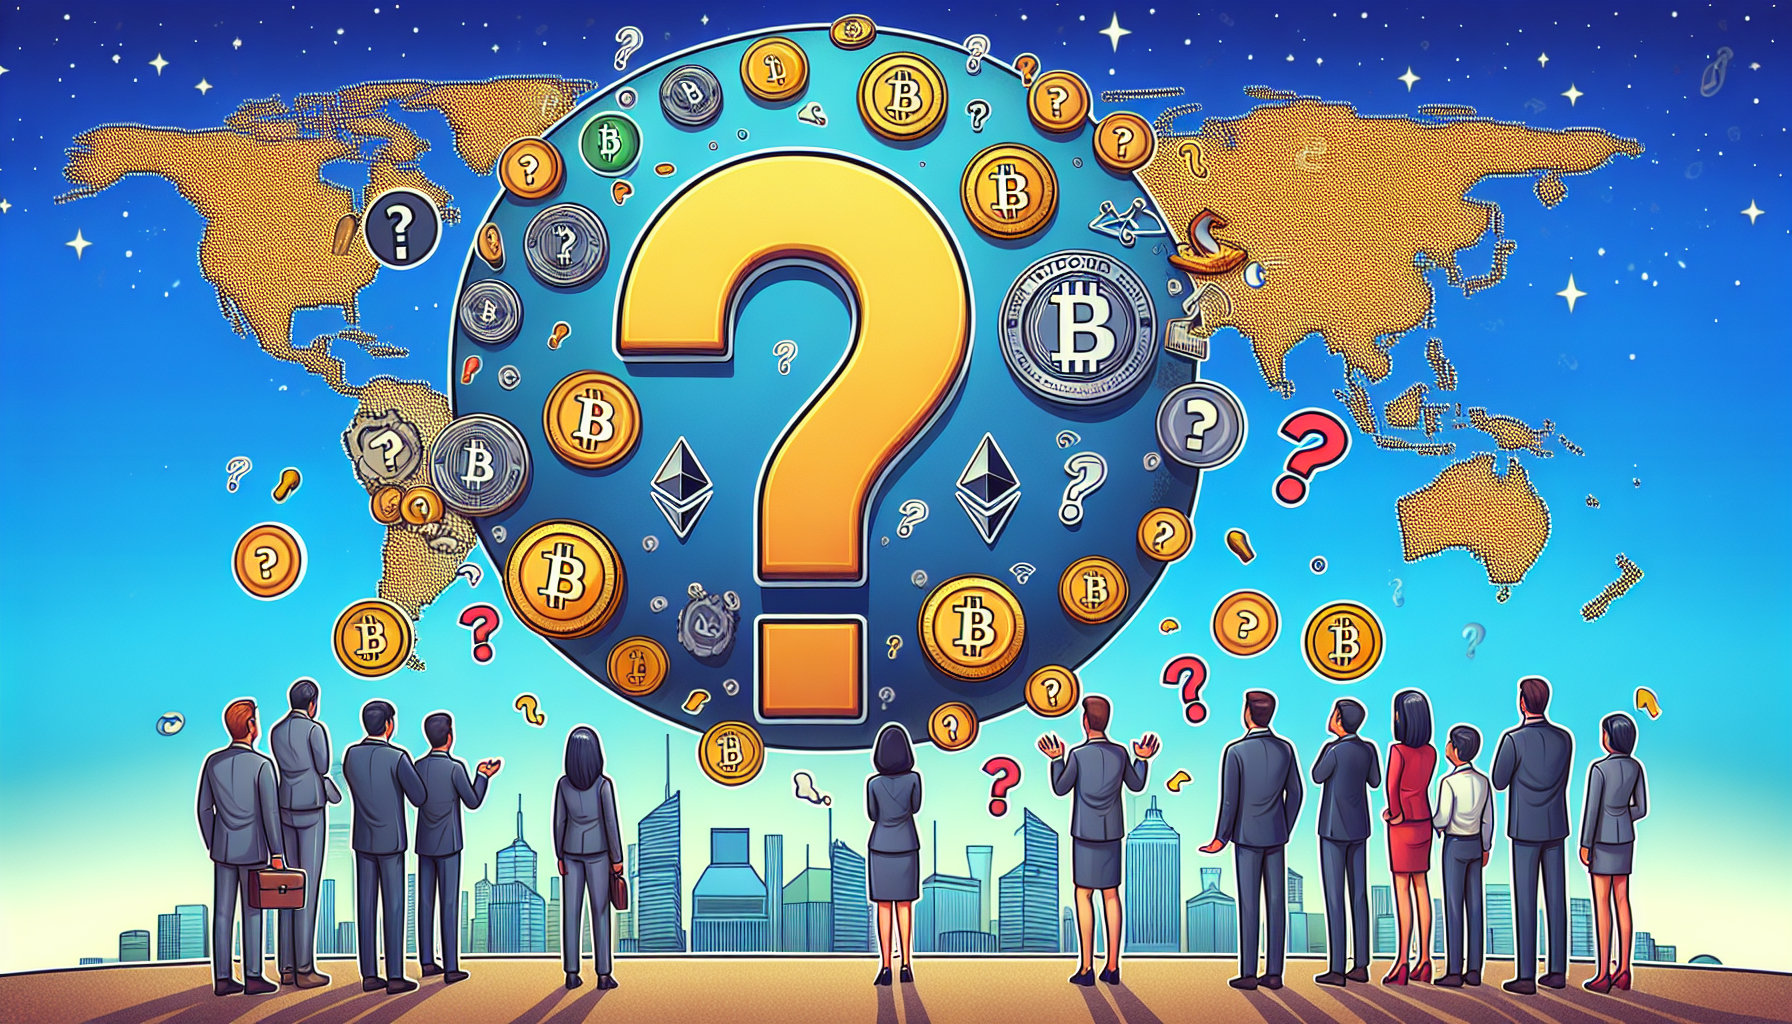 Can You Explain The Concept Of Regulatory Uncertainty In The Cryptocurrency Space?